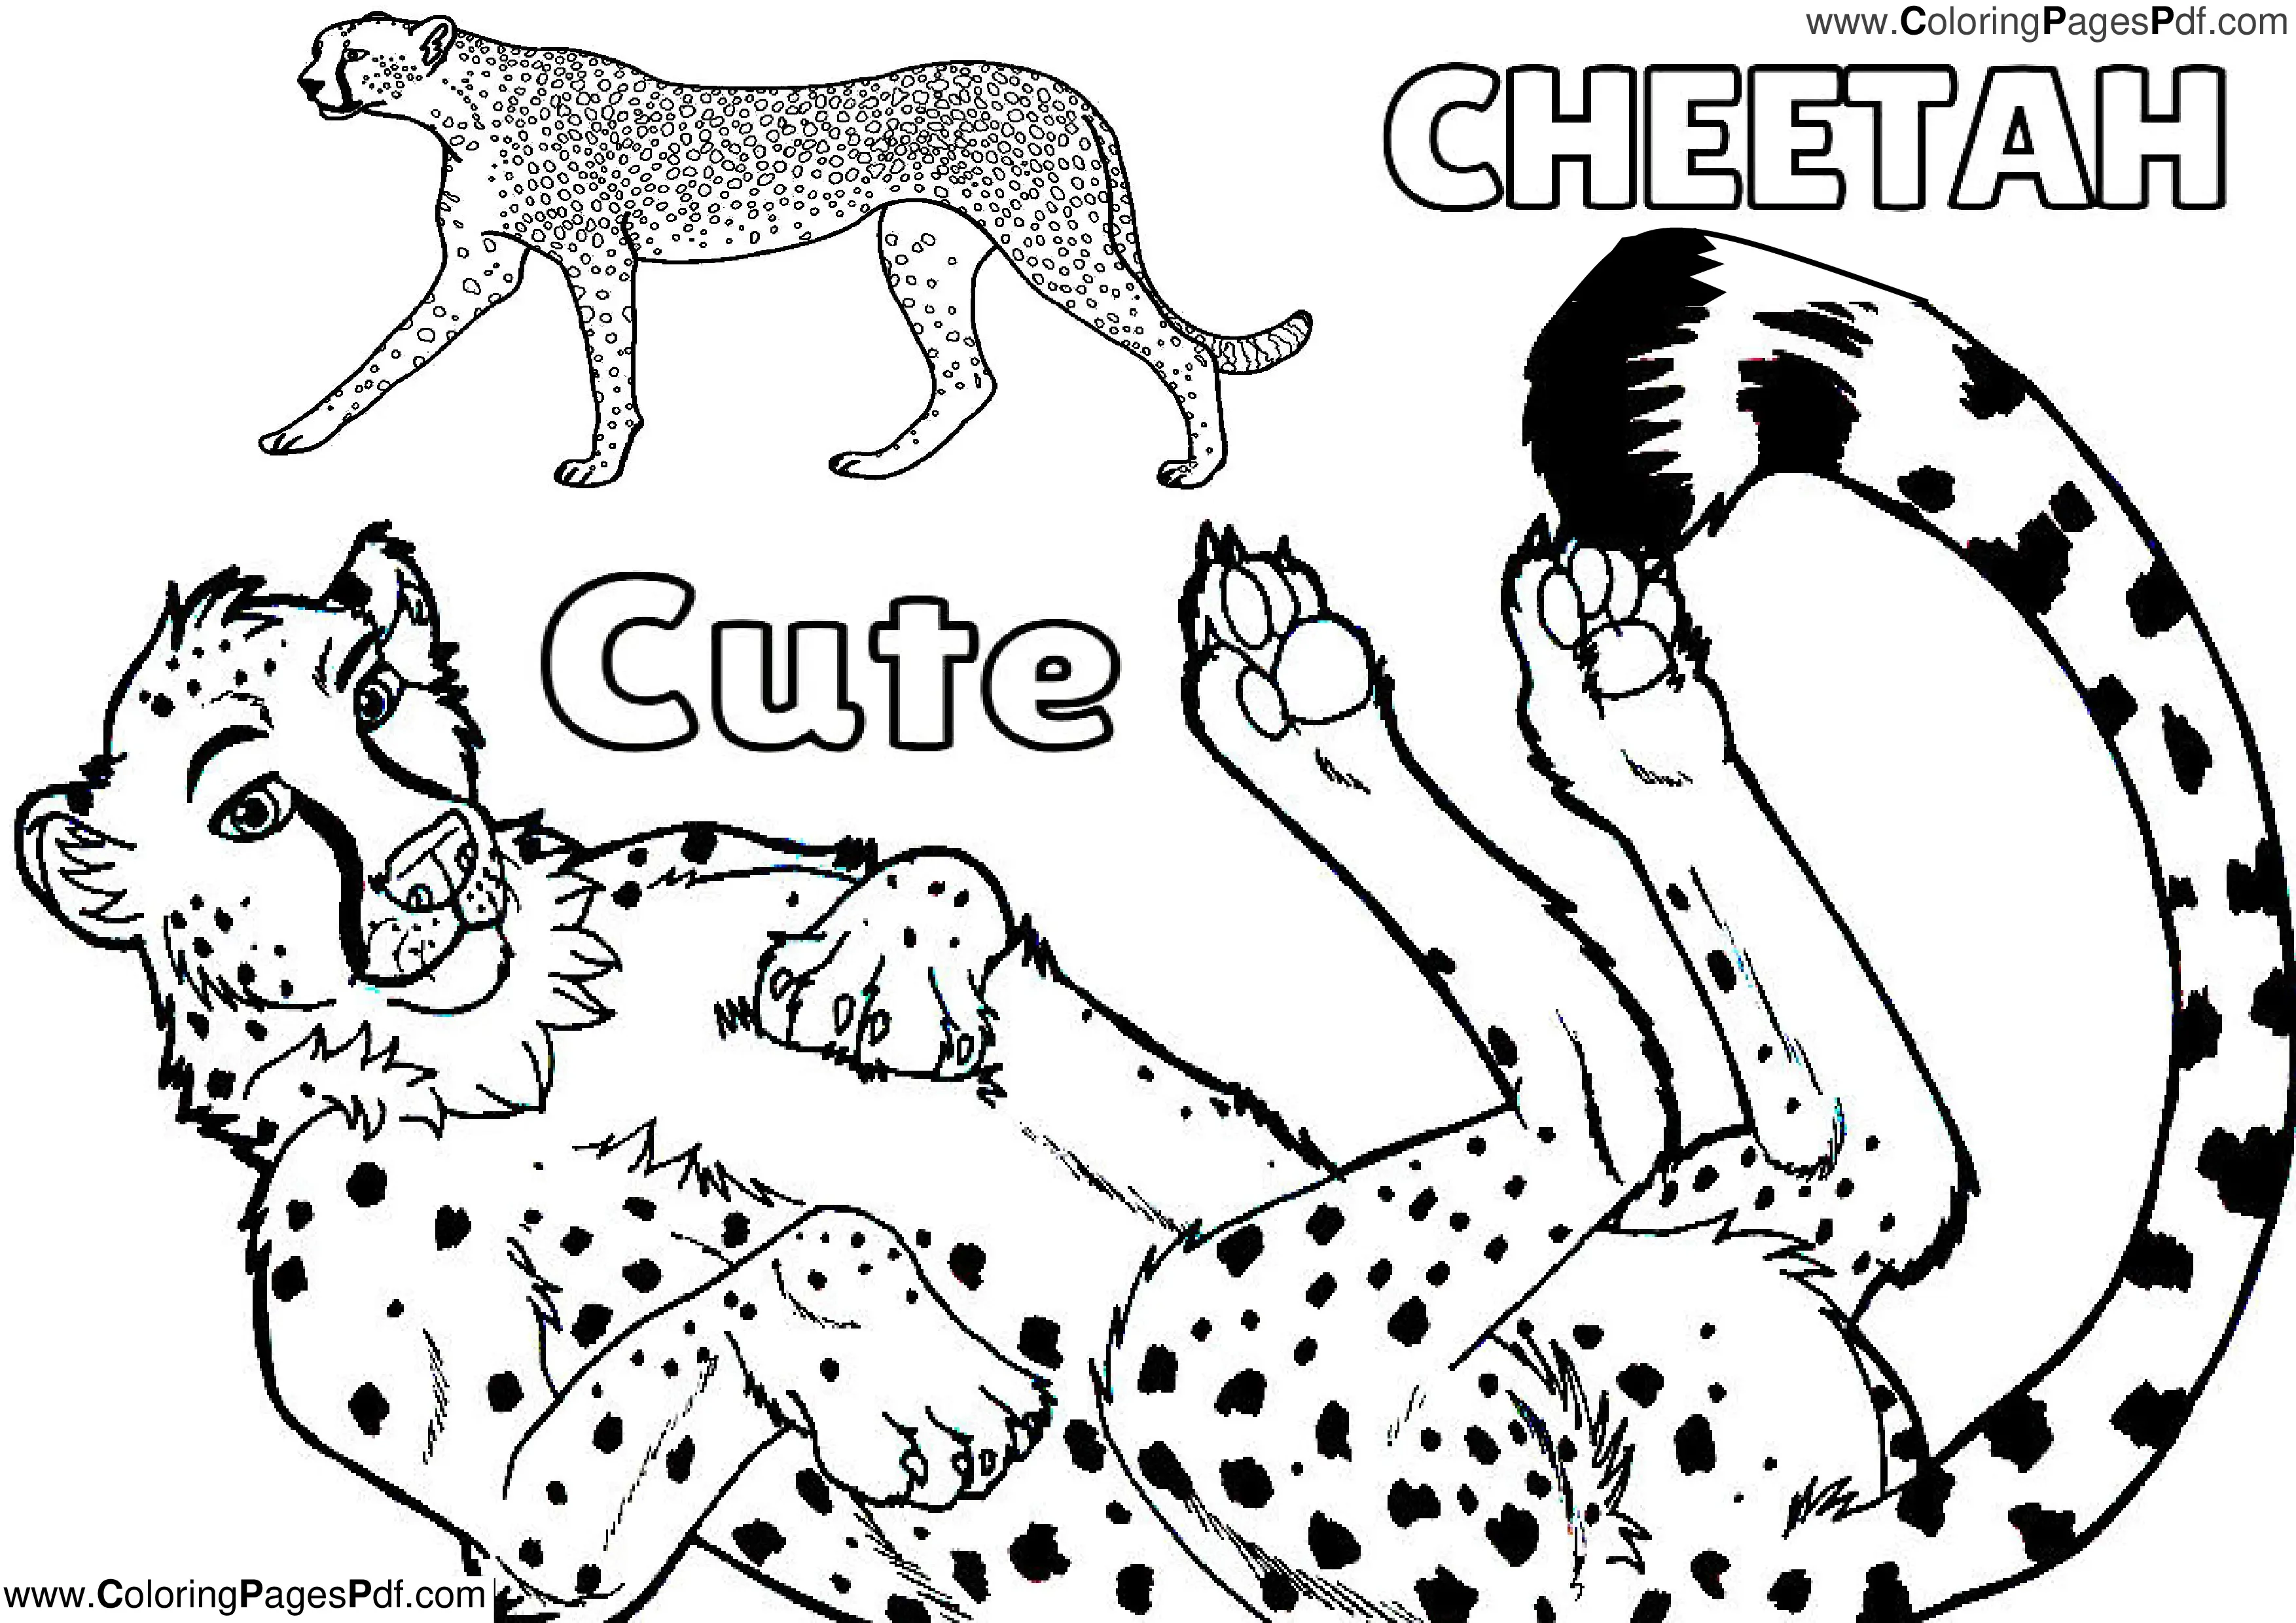 Cheetah coloring pages for girls